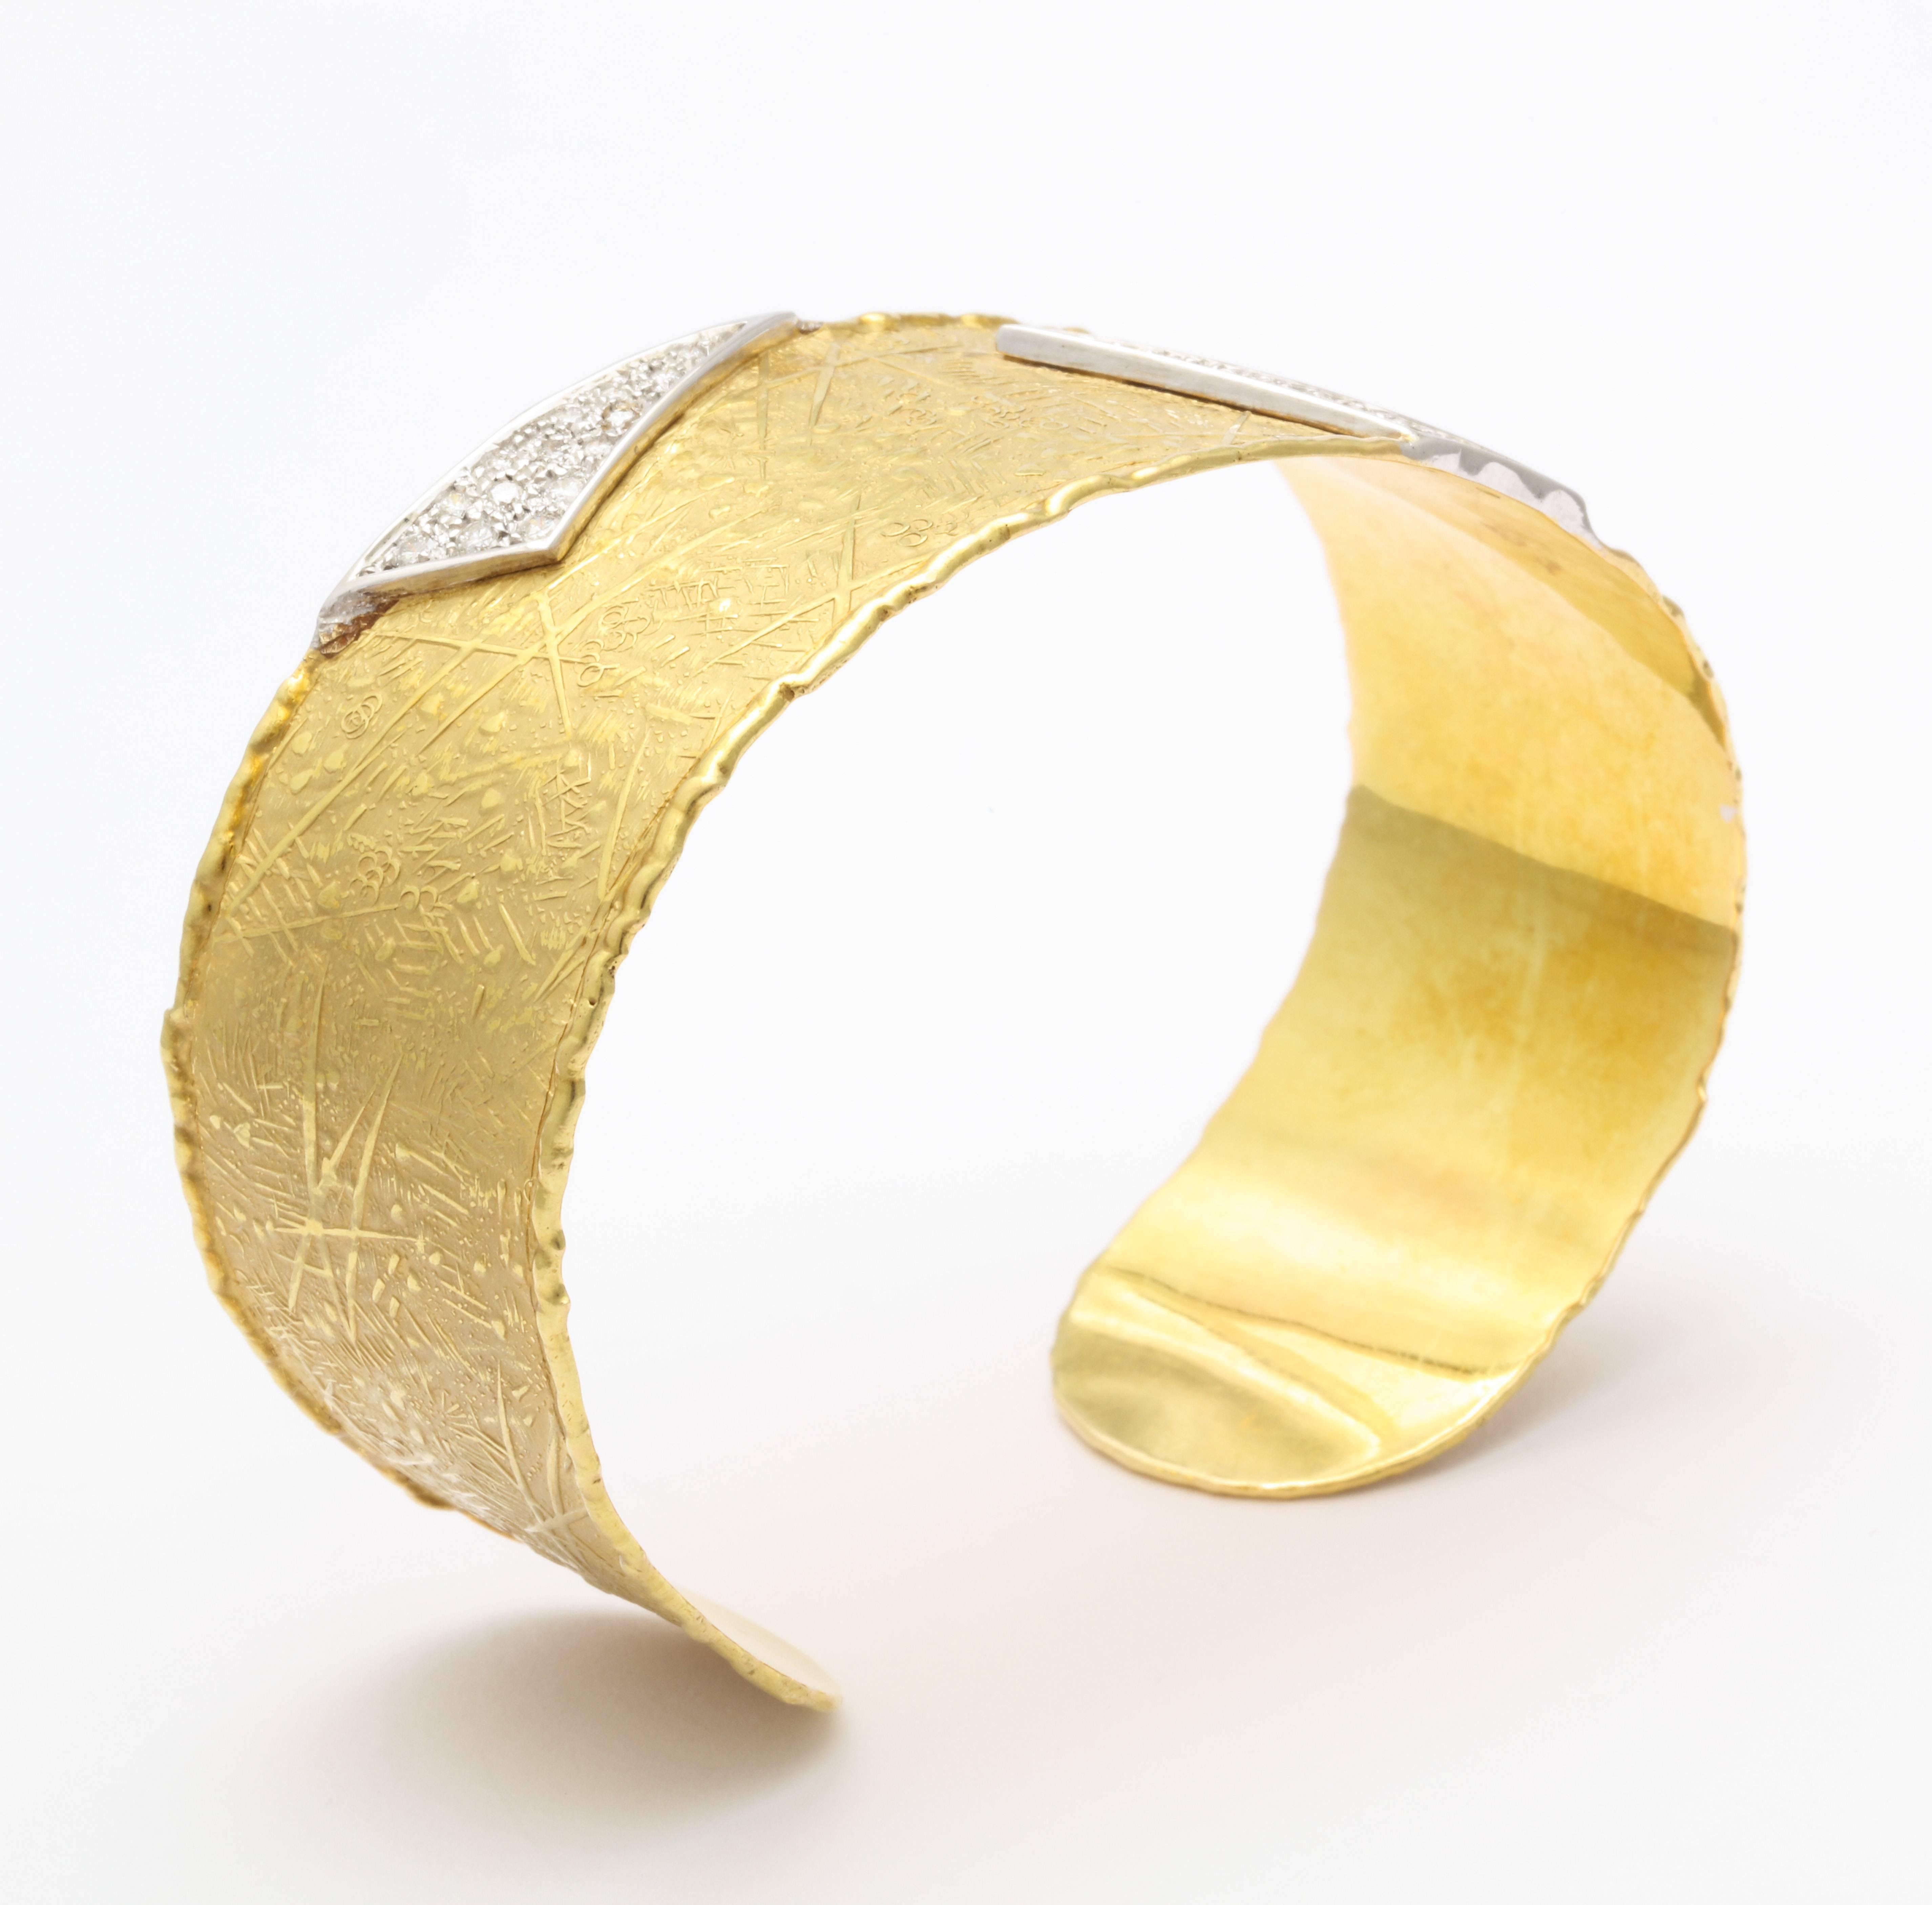 A elegant signed cuff by UnoARerre in 18 kt gold with diamonds and white gold